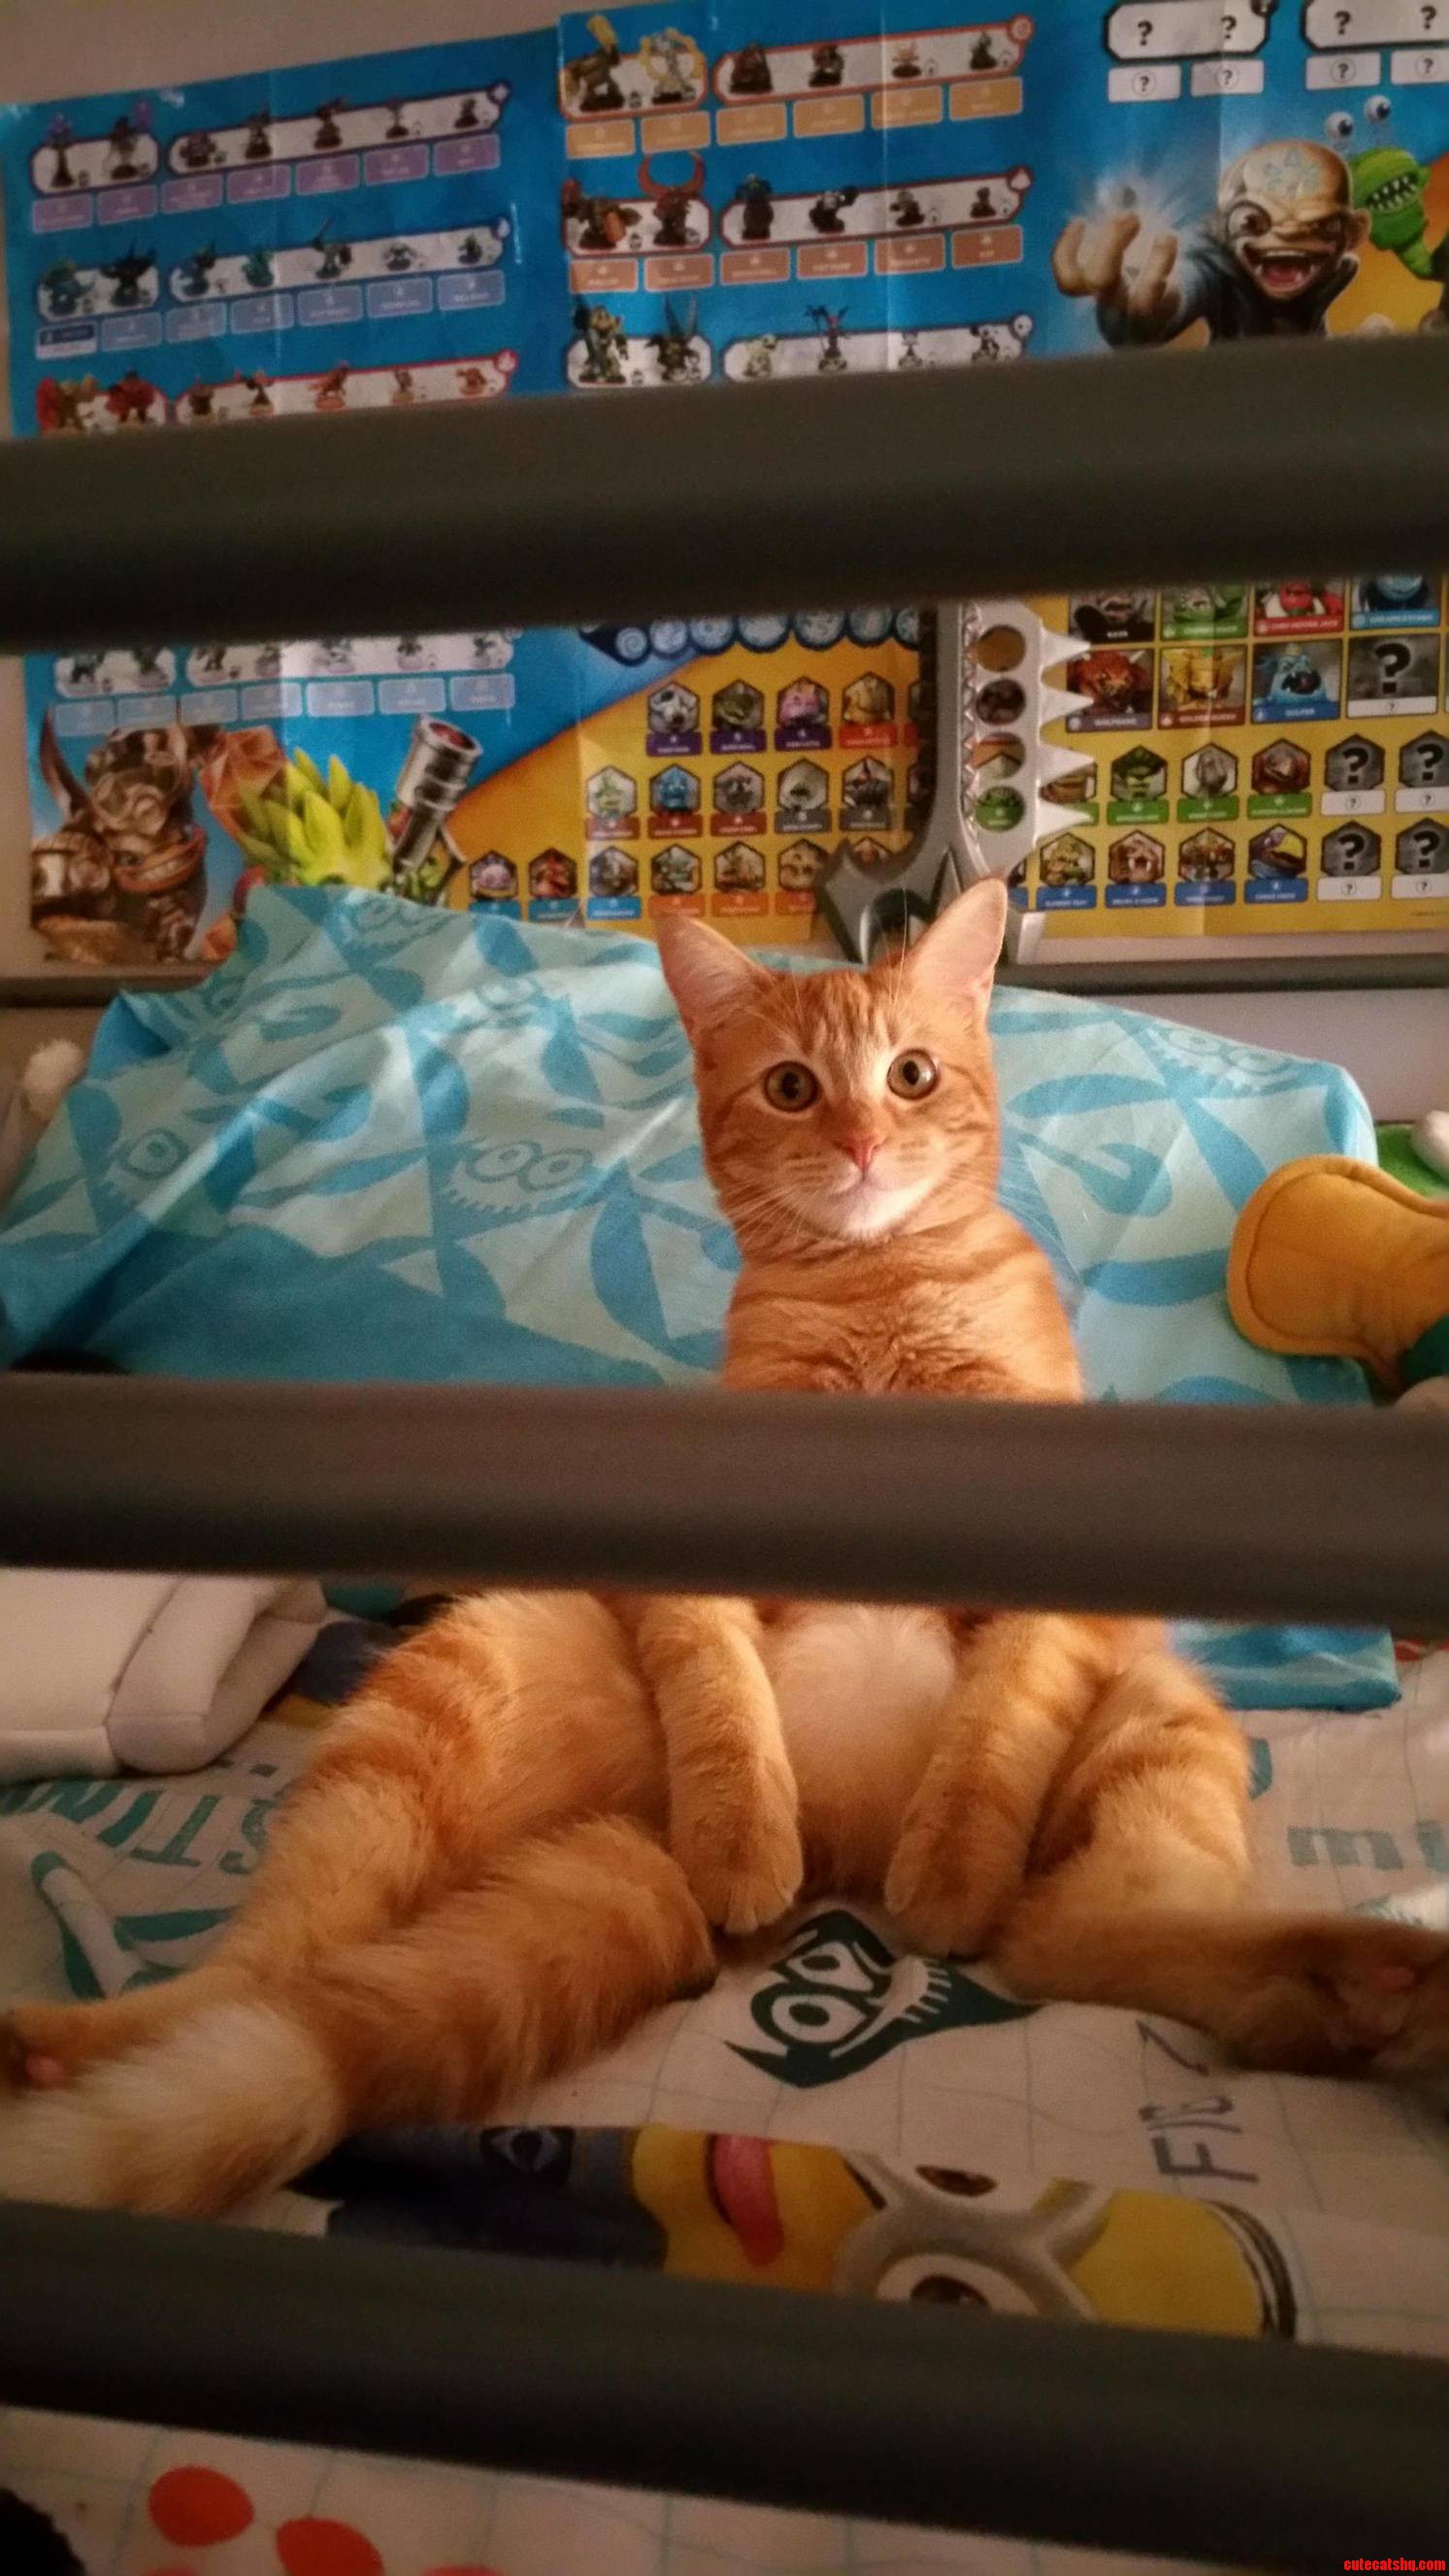 I was looking for my cat all day and found her on my sons bed like this.